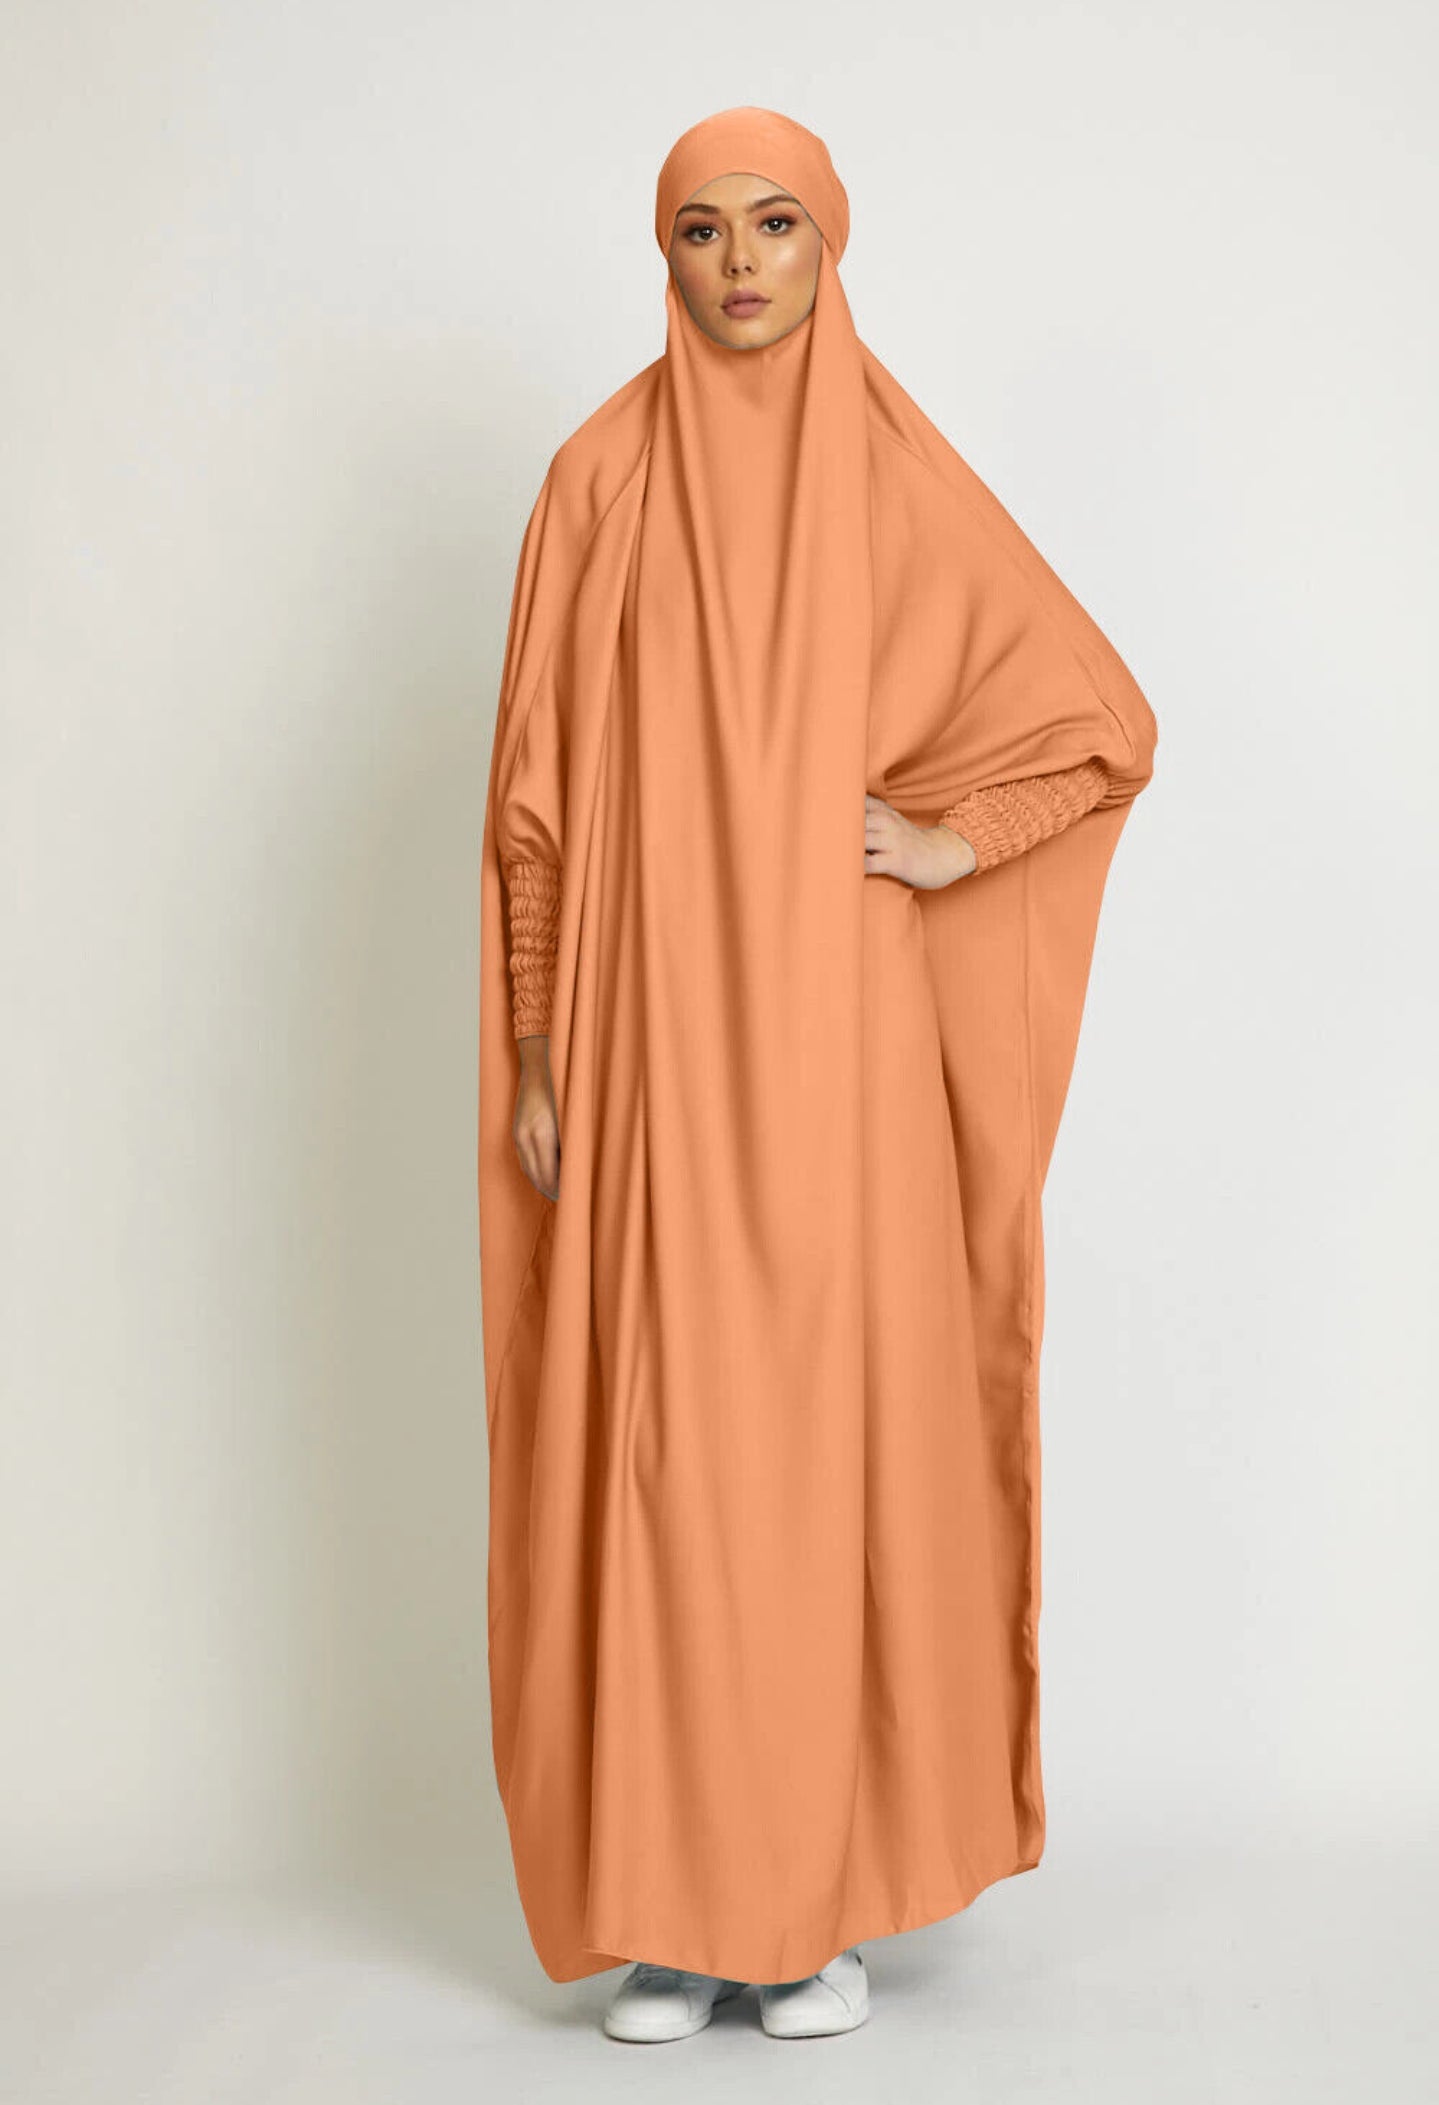 Discover elegance in every fold with Hikmah Boutique's Exclusive One-Piece Tie-Back Prayer Jilbab with Sleeves. Elevate your modest fashion with our exquisite design, offering versatile colors, tie-back feature, and affordable luxury. Embrace timeless elegance exclusively available at Hikmah Boutique.